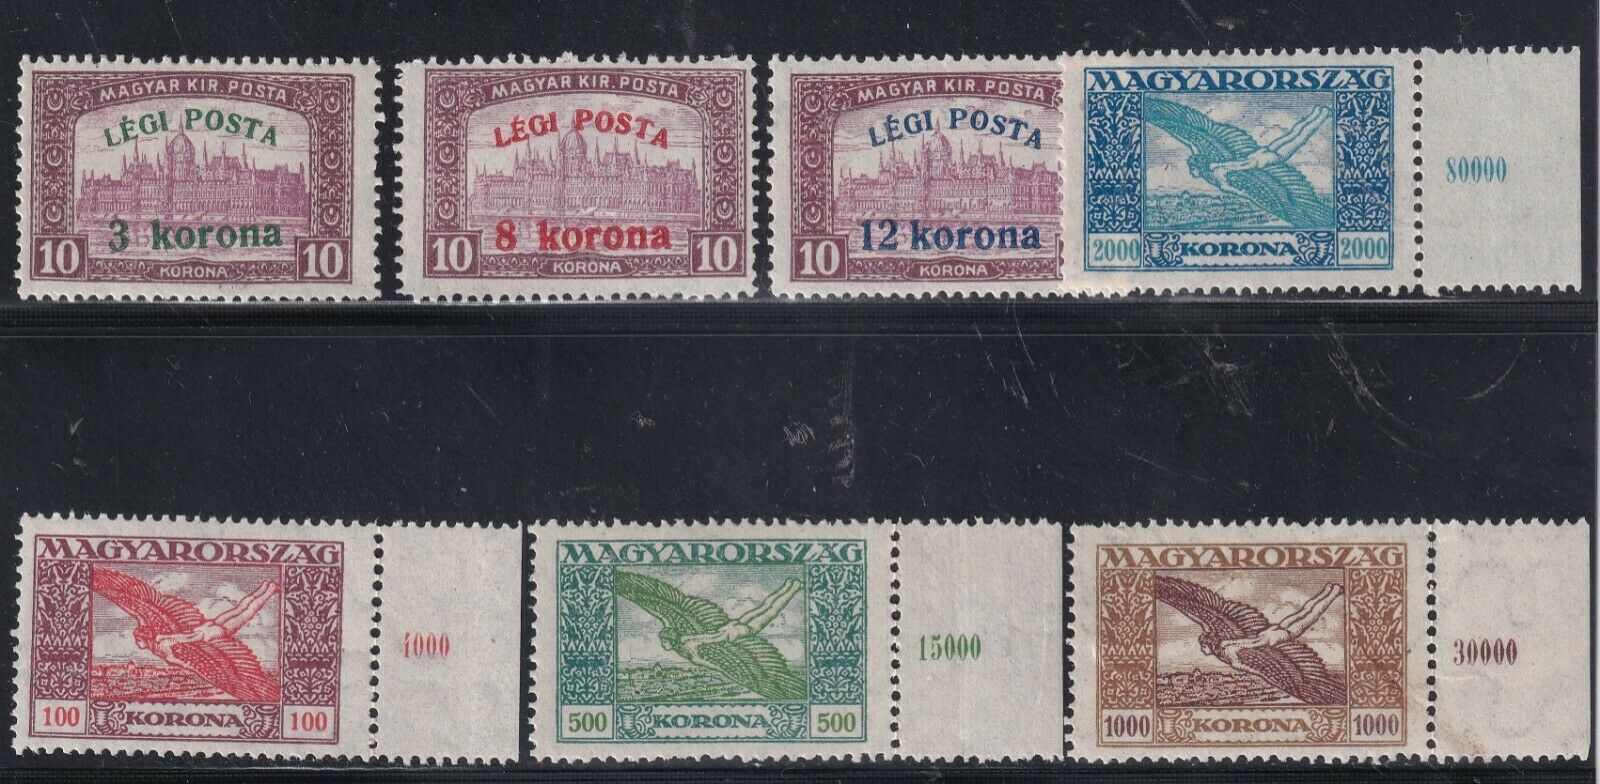 Hungary Stamp Mh/og  Airmail Stamps Collection Lot #1 Bottom Stamps Mnh